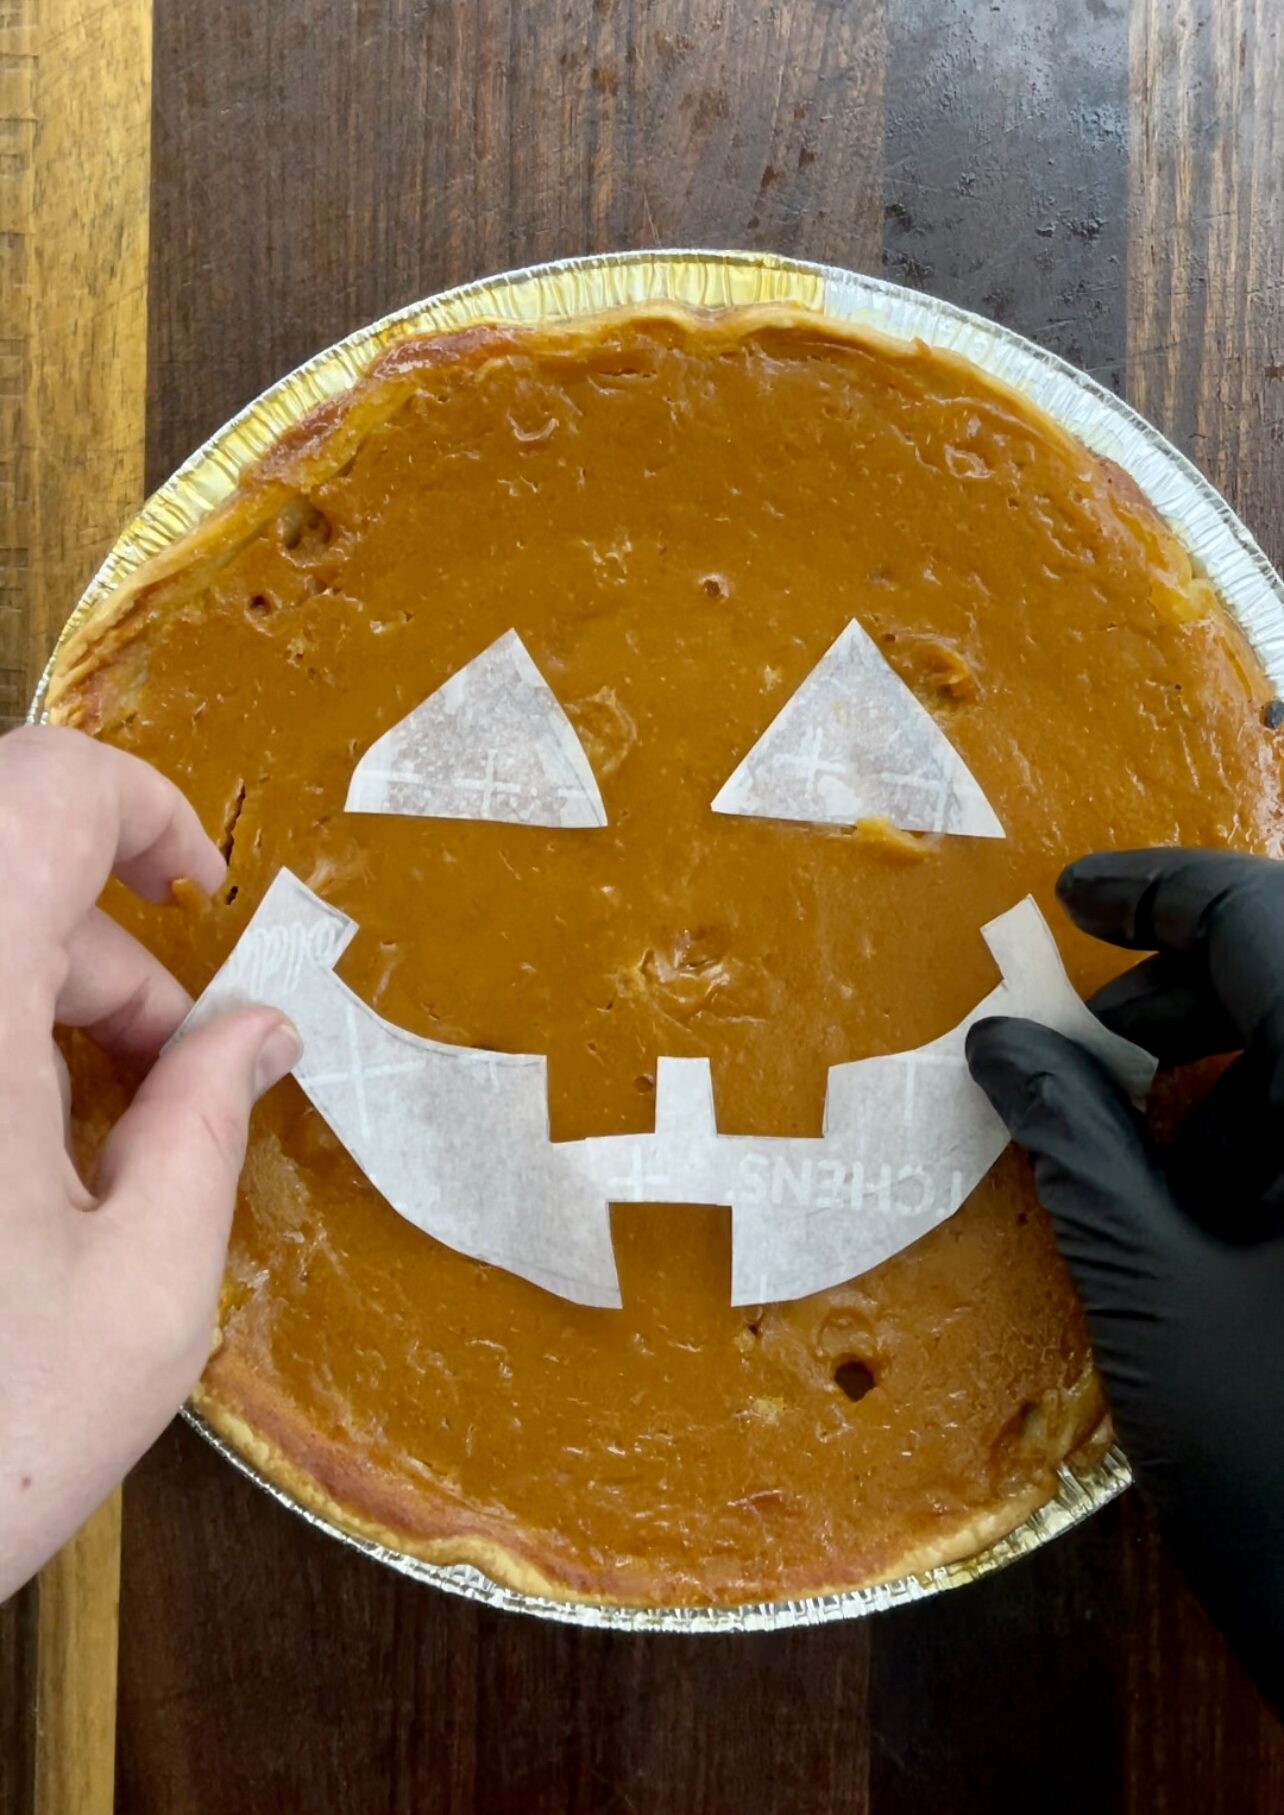 Adding the paper stencil to the smoked pumpkin pie